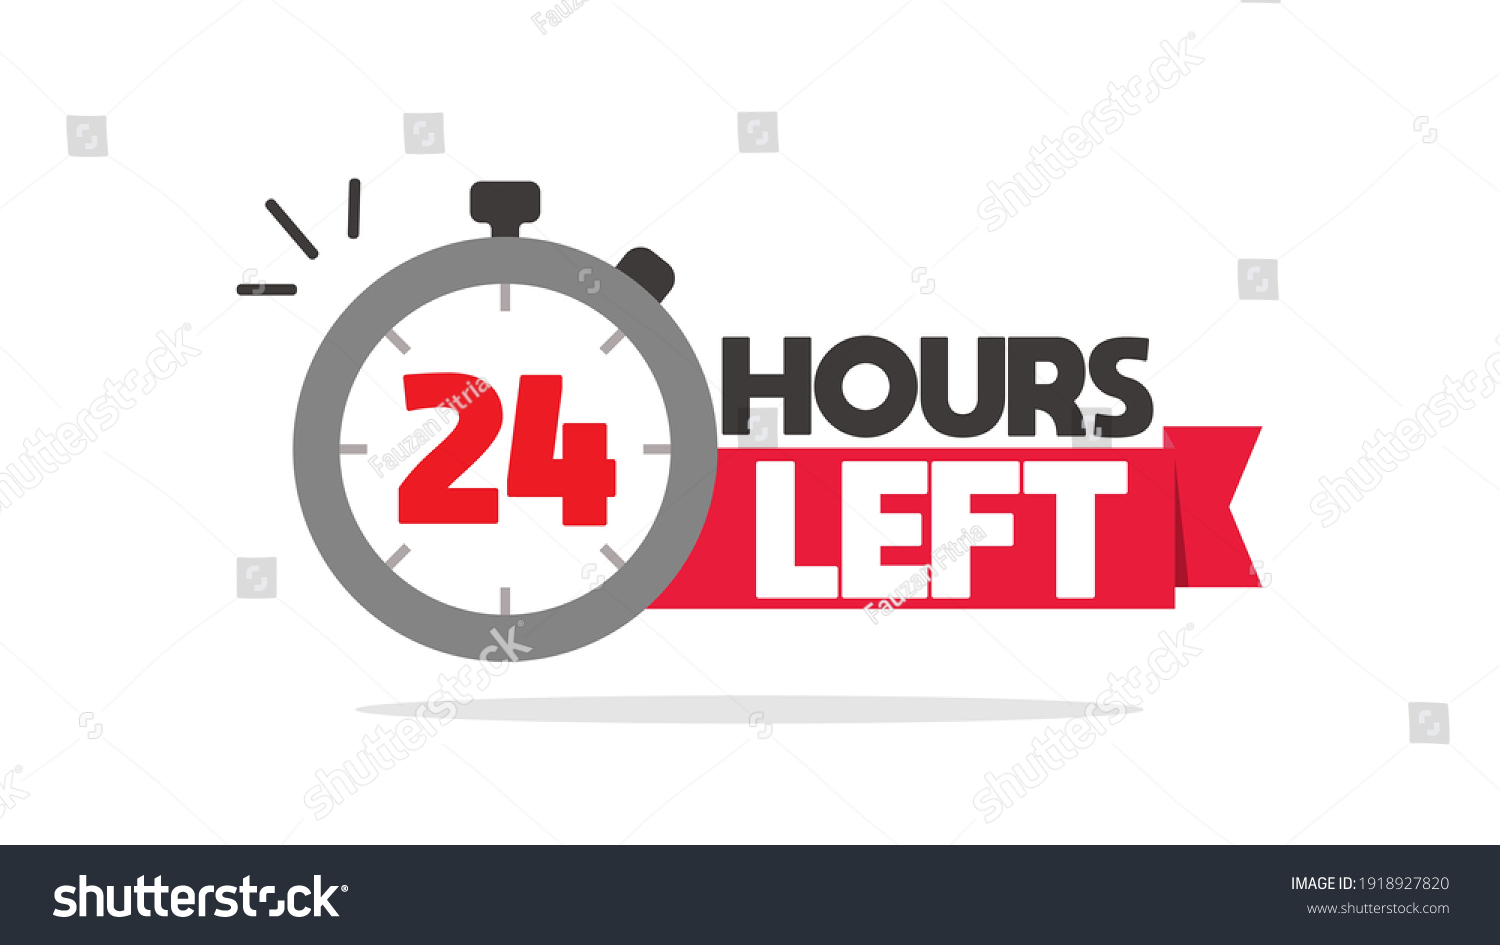 SVG of 24 hours left or to go sale countdown symbol. Time remaining special offer promotion. Icon banner for time discount announcement marketing element vector illustration svg